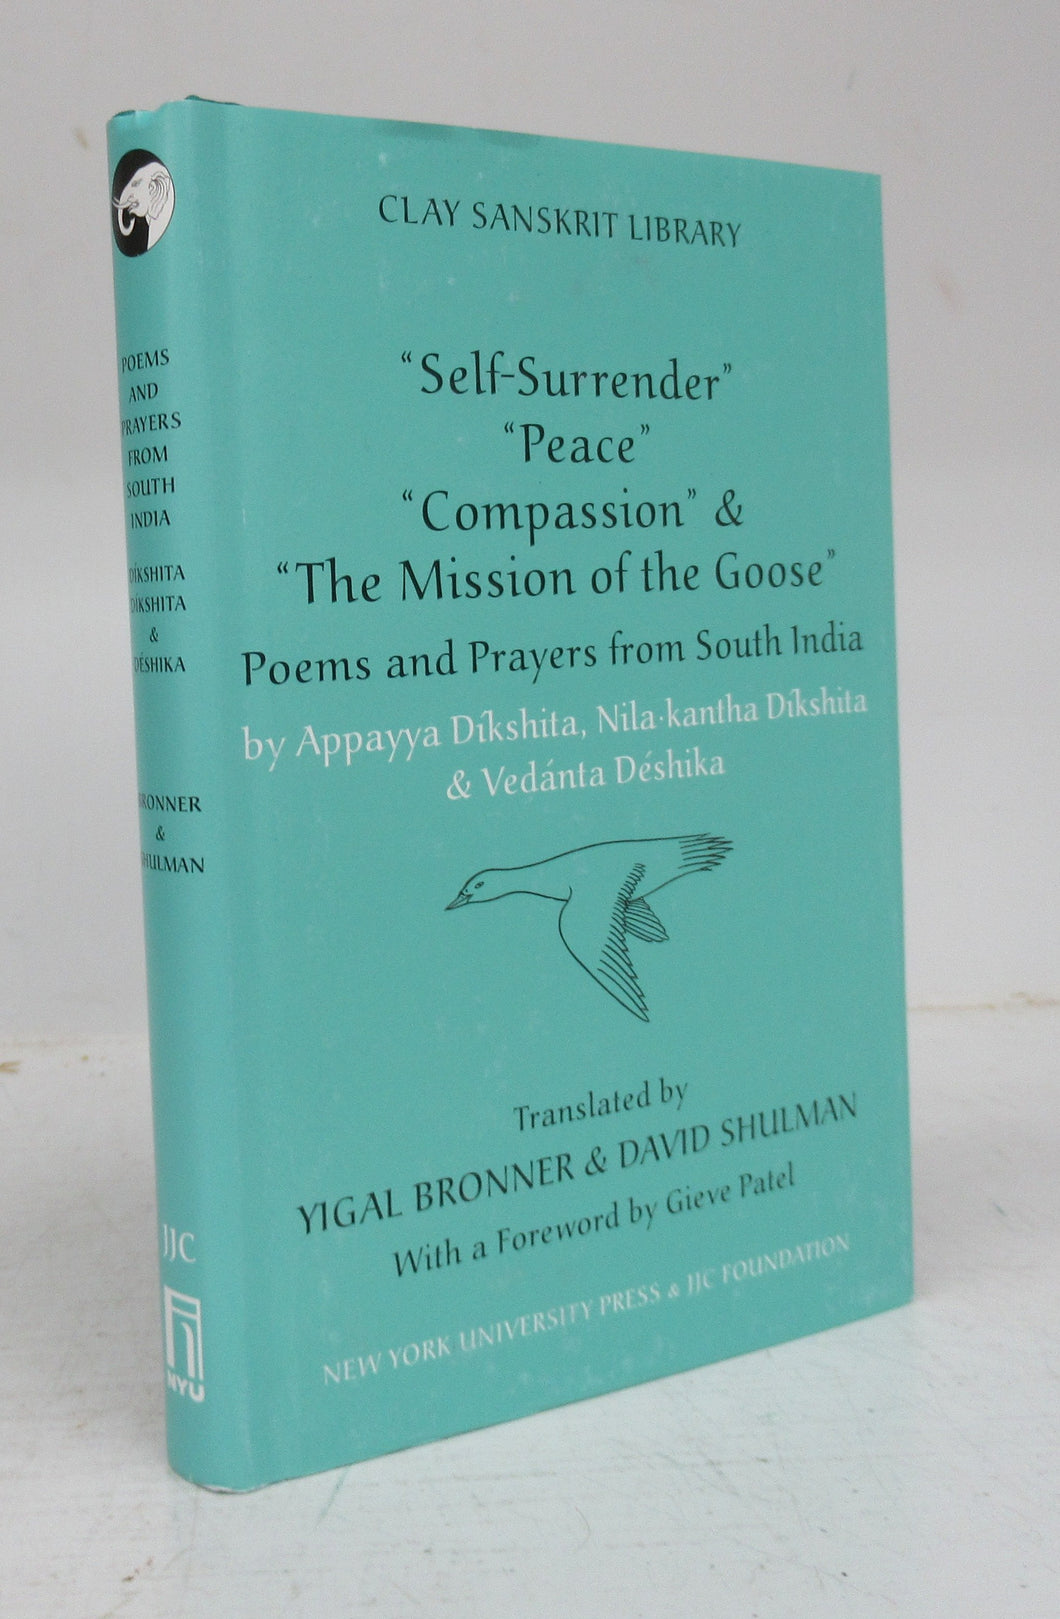 Self-Surrender "Peace" "Compassion" & "The Mission of the Goose":  Poems and Prayers from South India